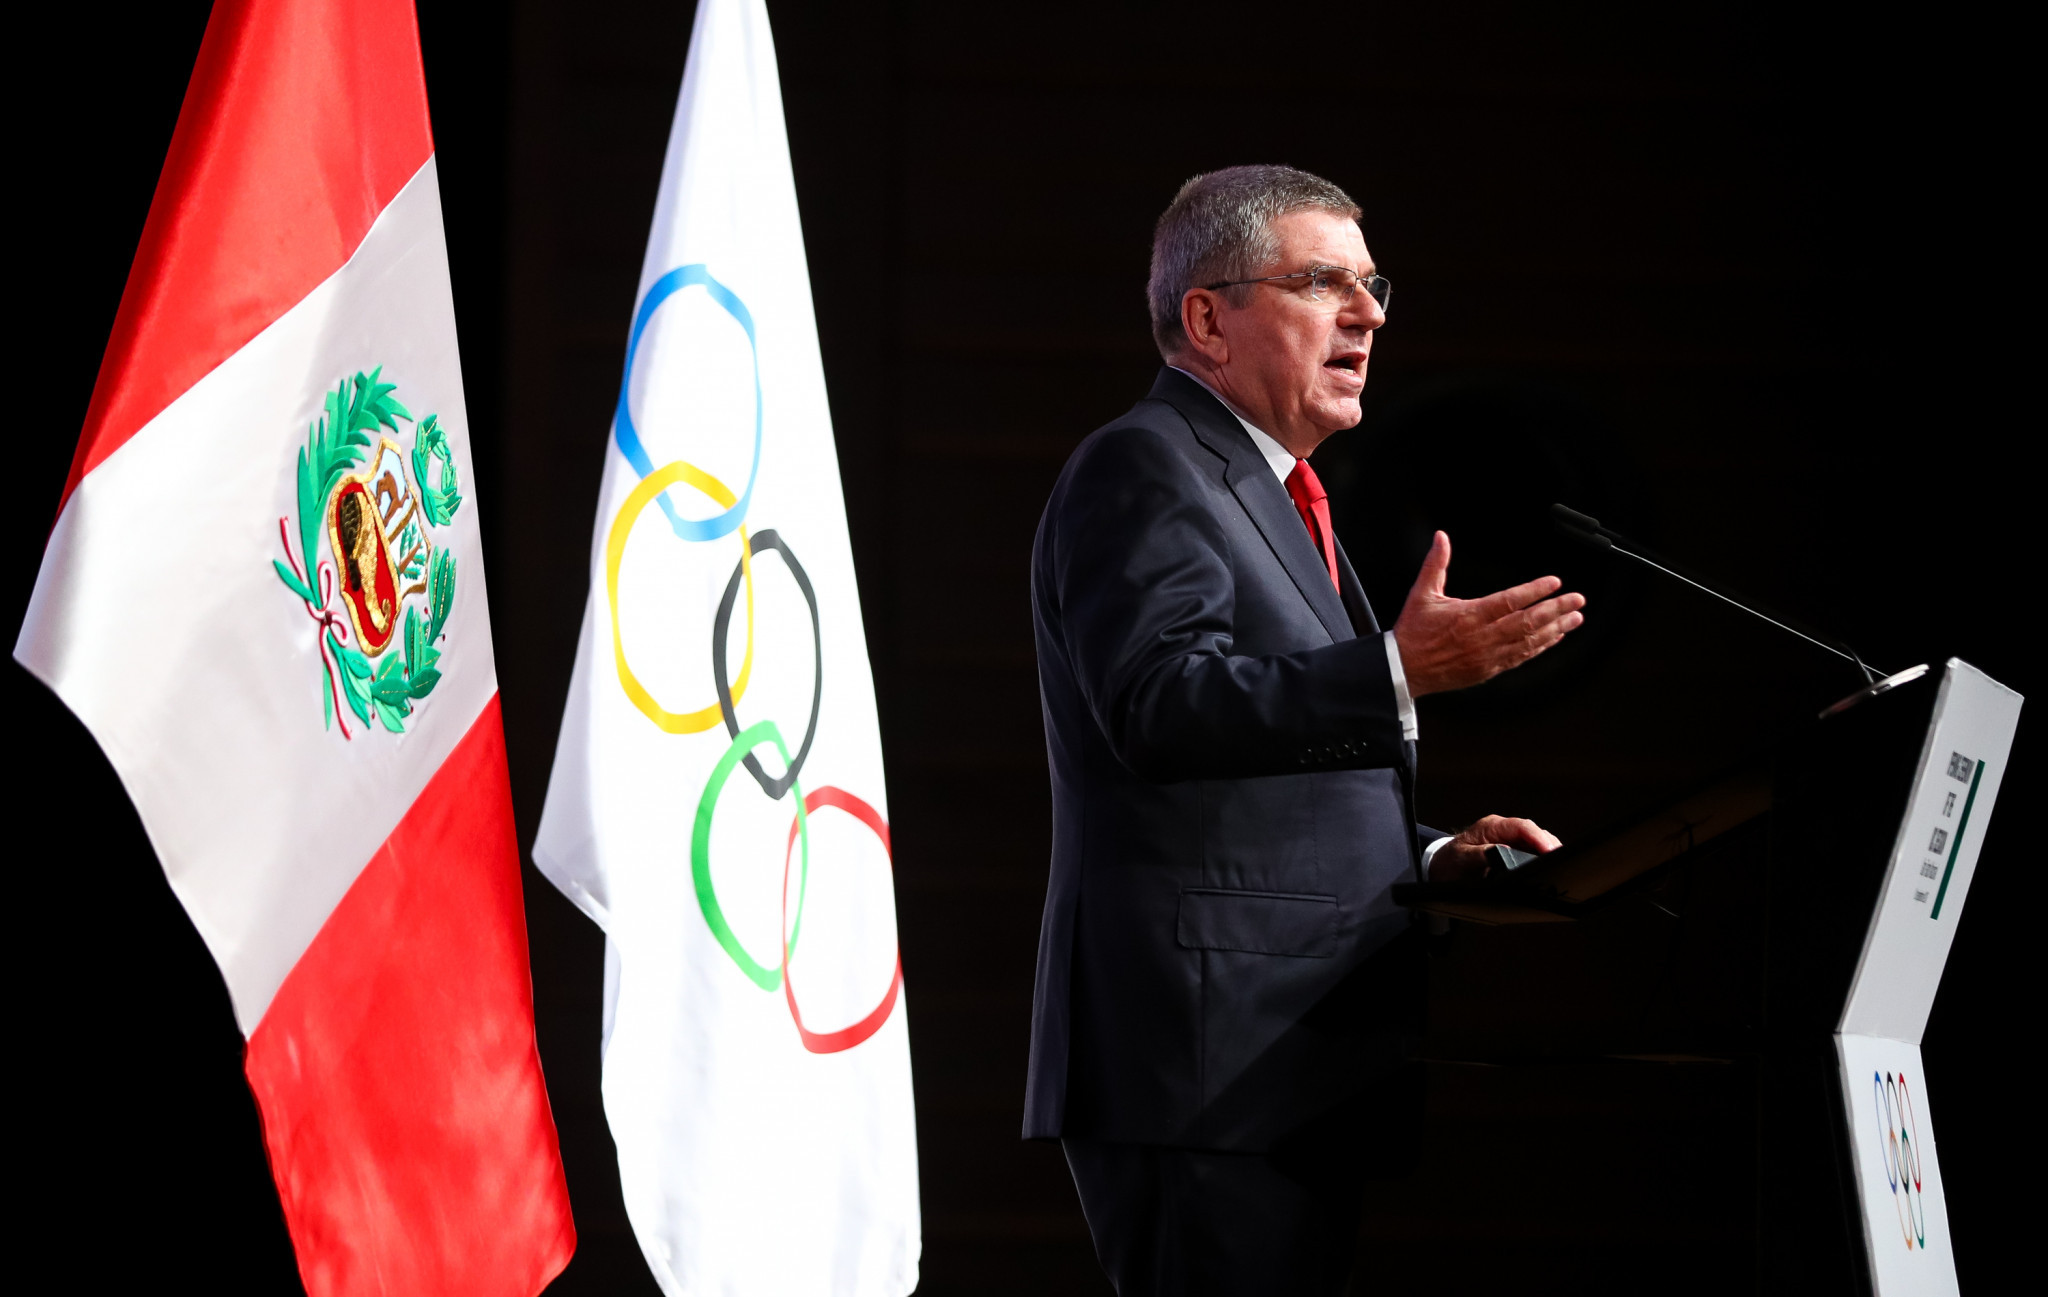 Sport can save the world claim Bach and Kuczynski as 131st IOC Session opened in Lima